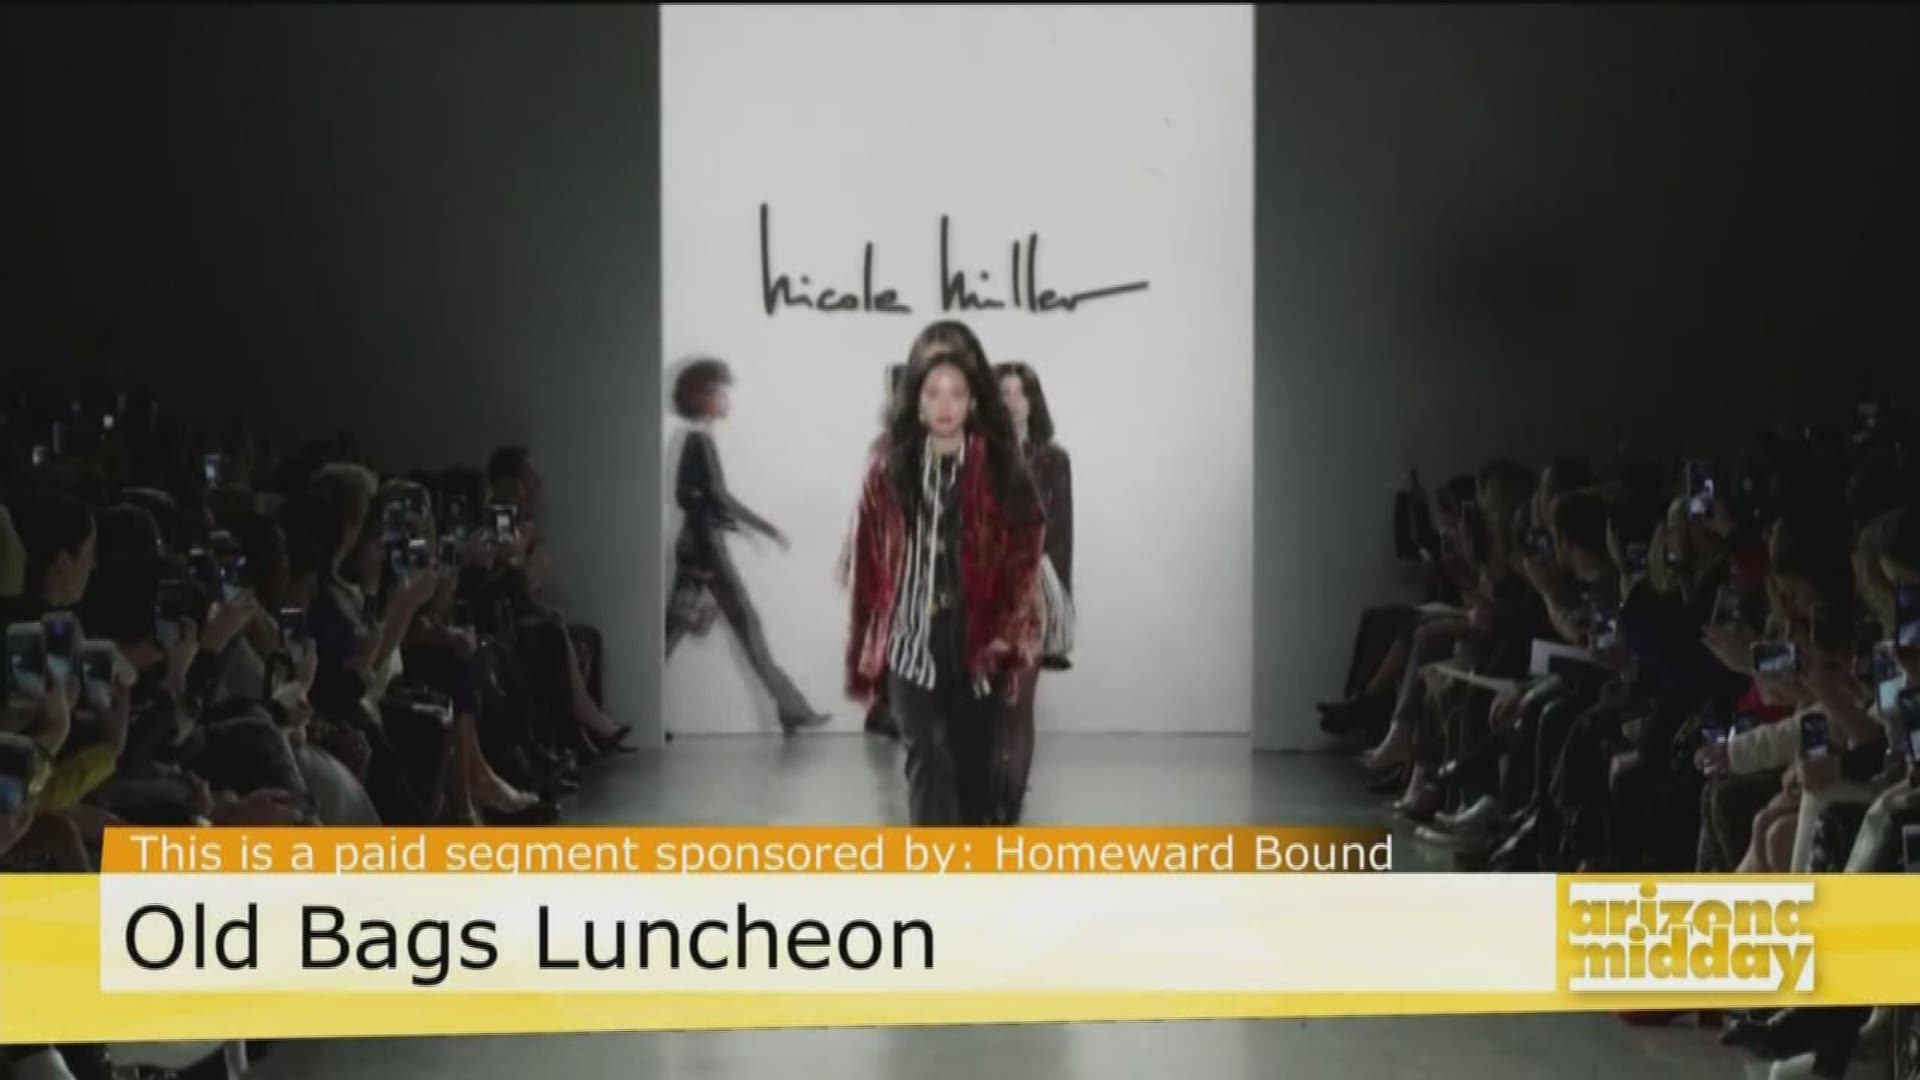 Fashion Designer Nicole Miller tells not only about this seasons trends, but how you can give back through Homeward Bound's Old Bags Luncheon.